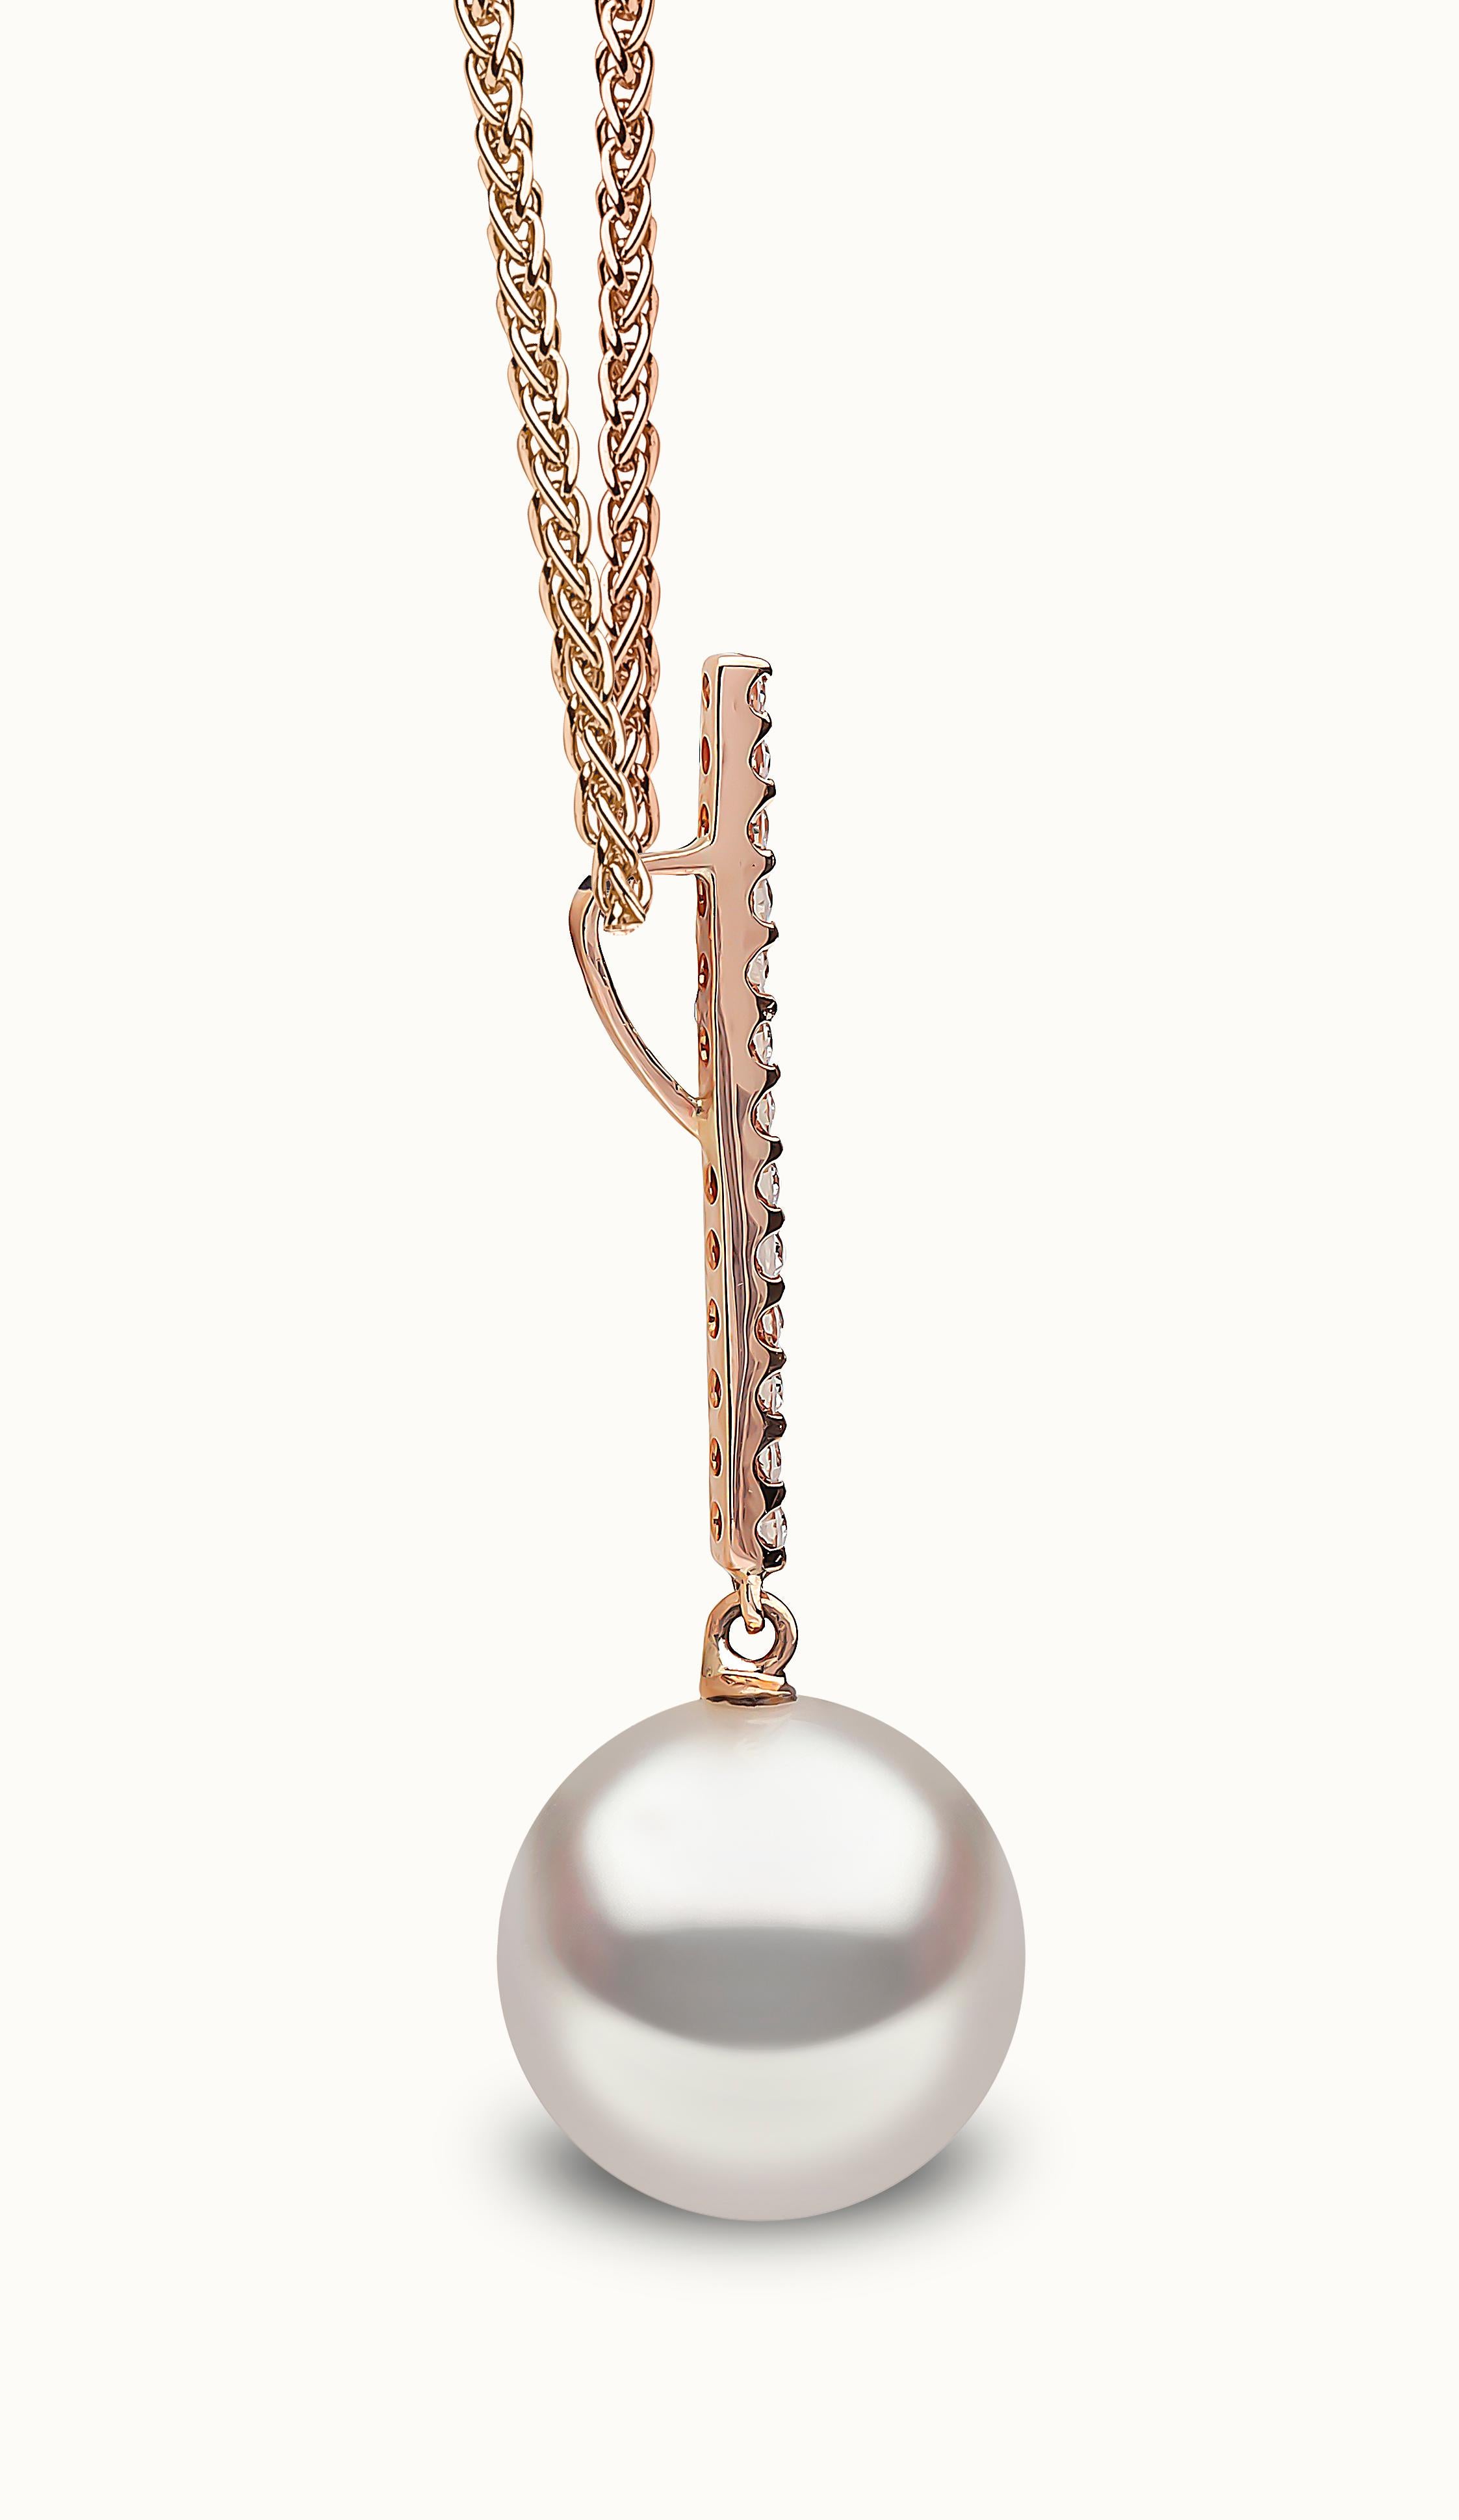 This Freshwater pearl and diamond pendant from Yoko London is timelessly elegant. The 18 Karat Rose gold setting enriches the radiance of the Freshwater pearl and the scintillating sparkle of the diamonds. Perfect for both daytime and evening looks,